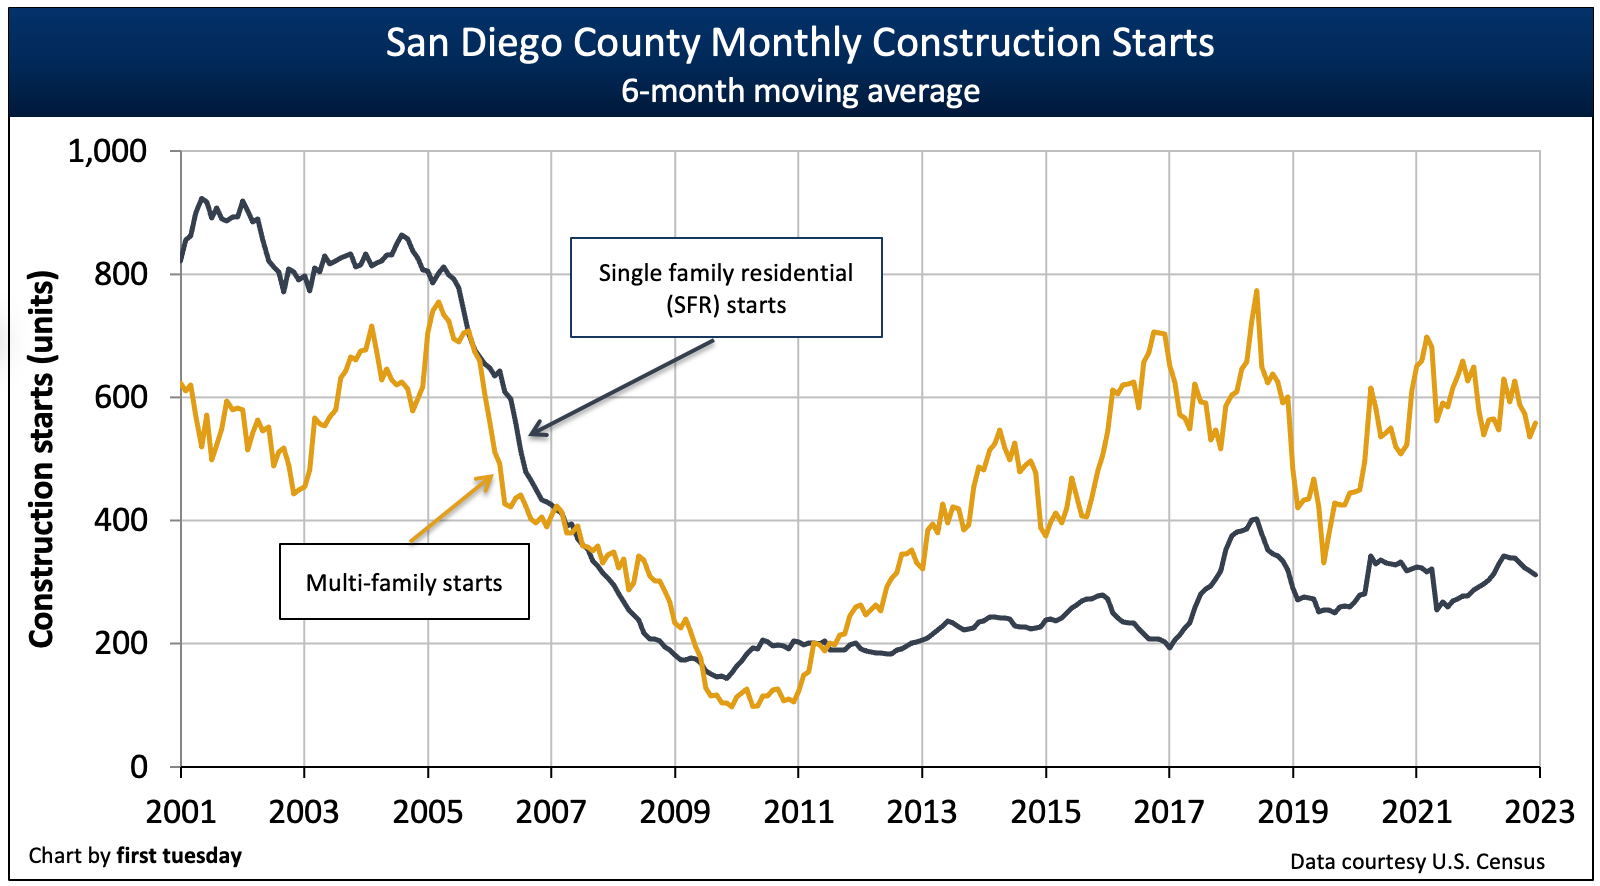 This chart shows the number of new construction starts each month in San Diego.